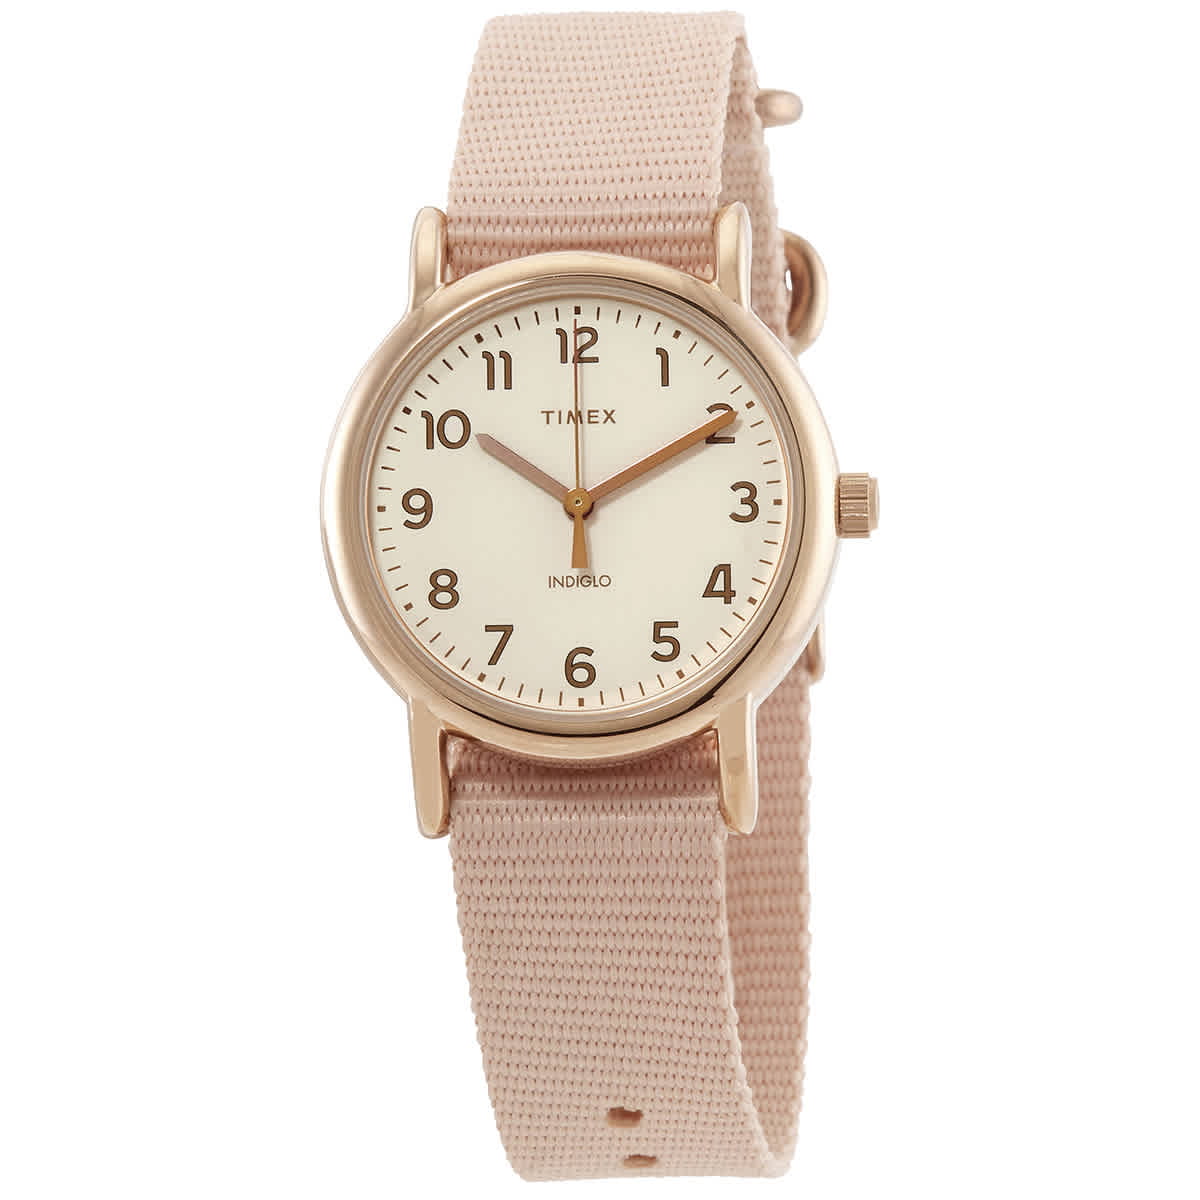 Timex Women's Pink & Gold Toned Water Resistant Wristwatch WORKING!